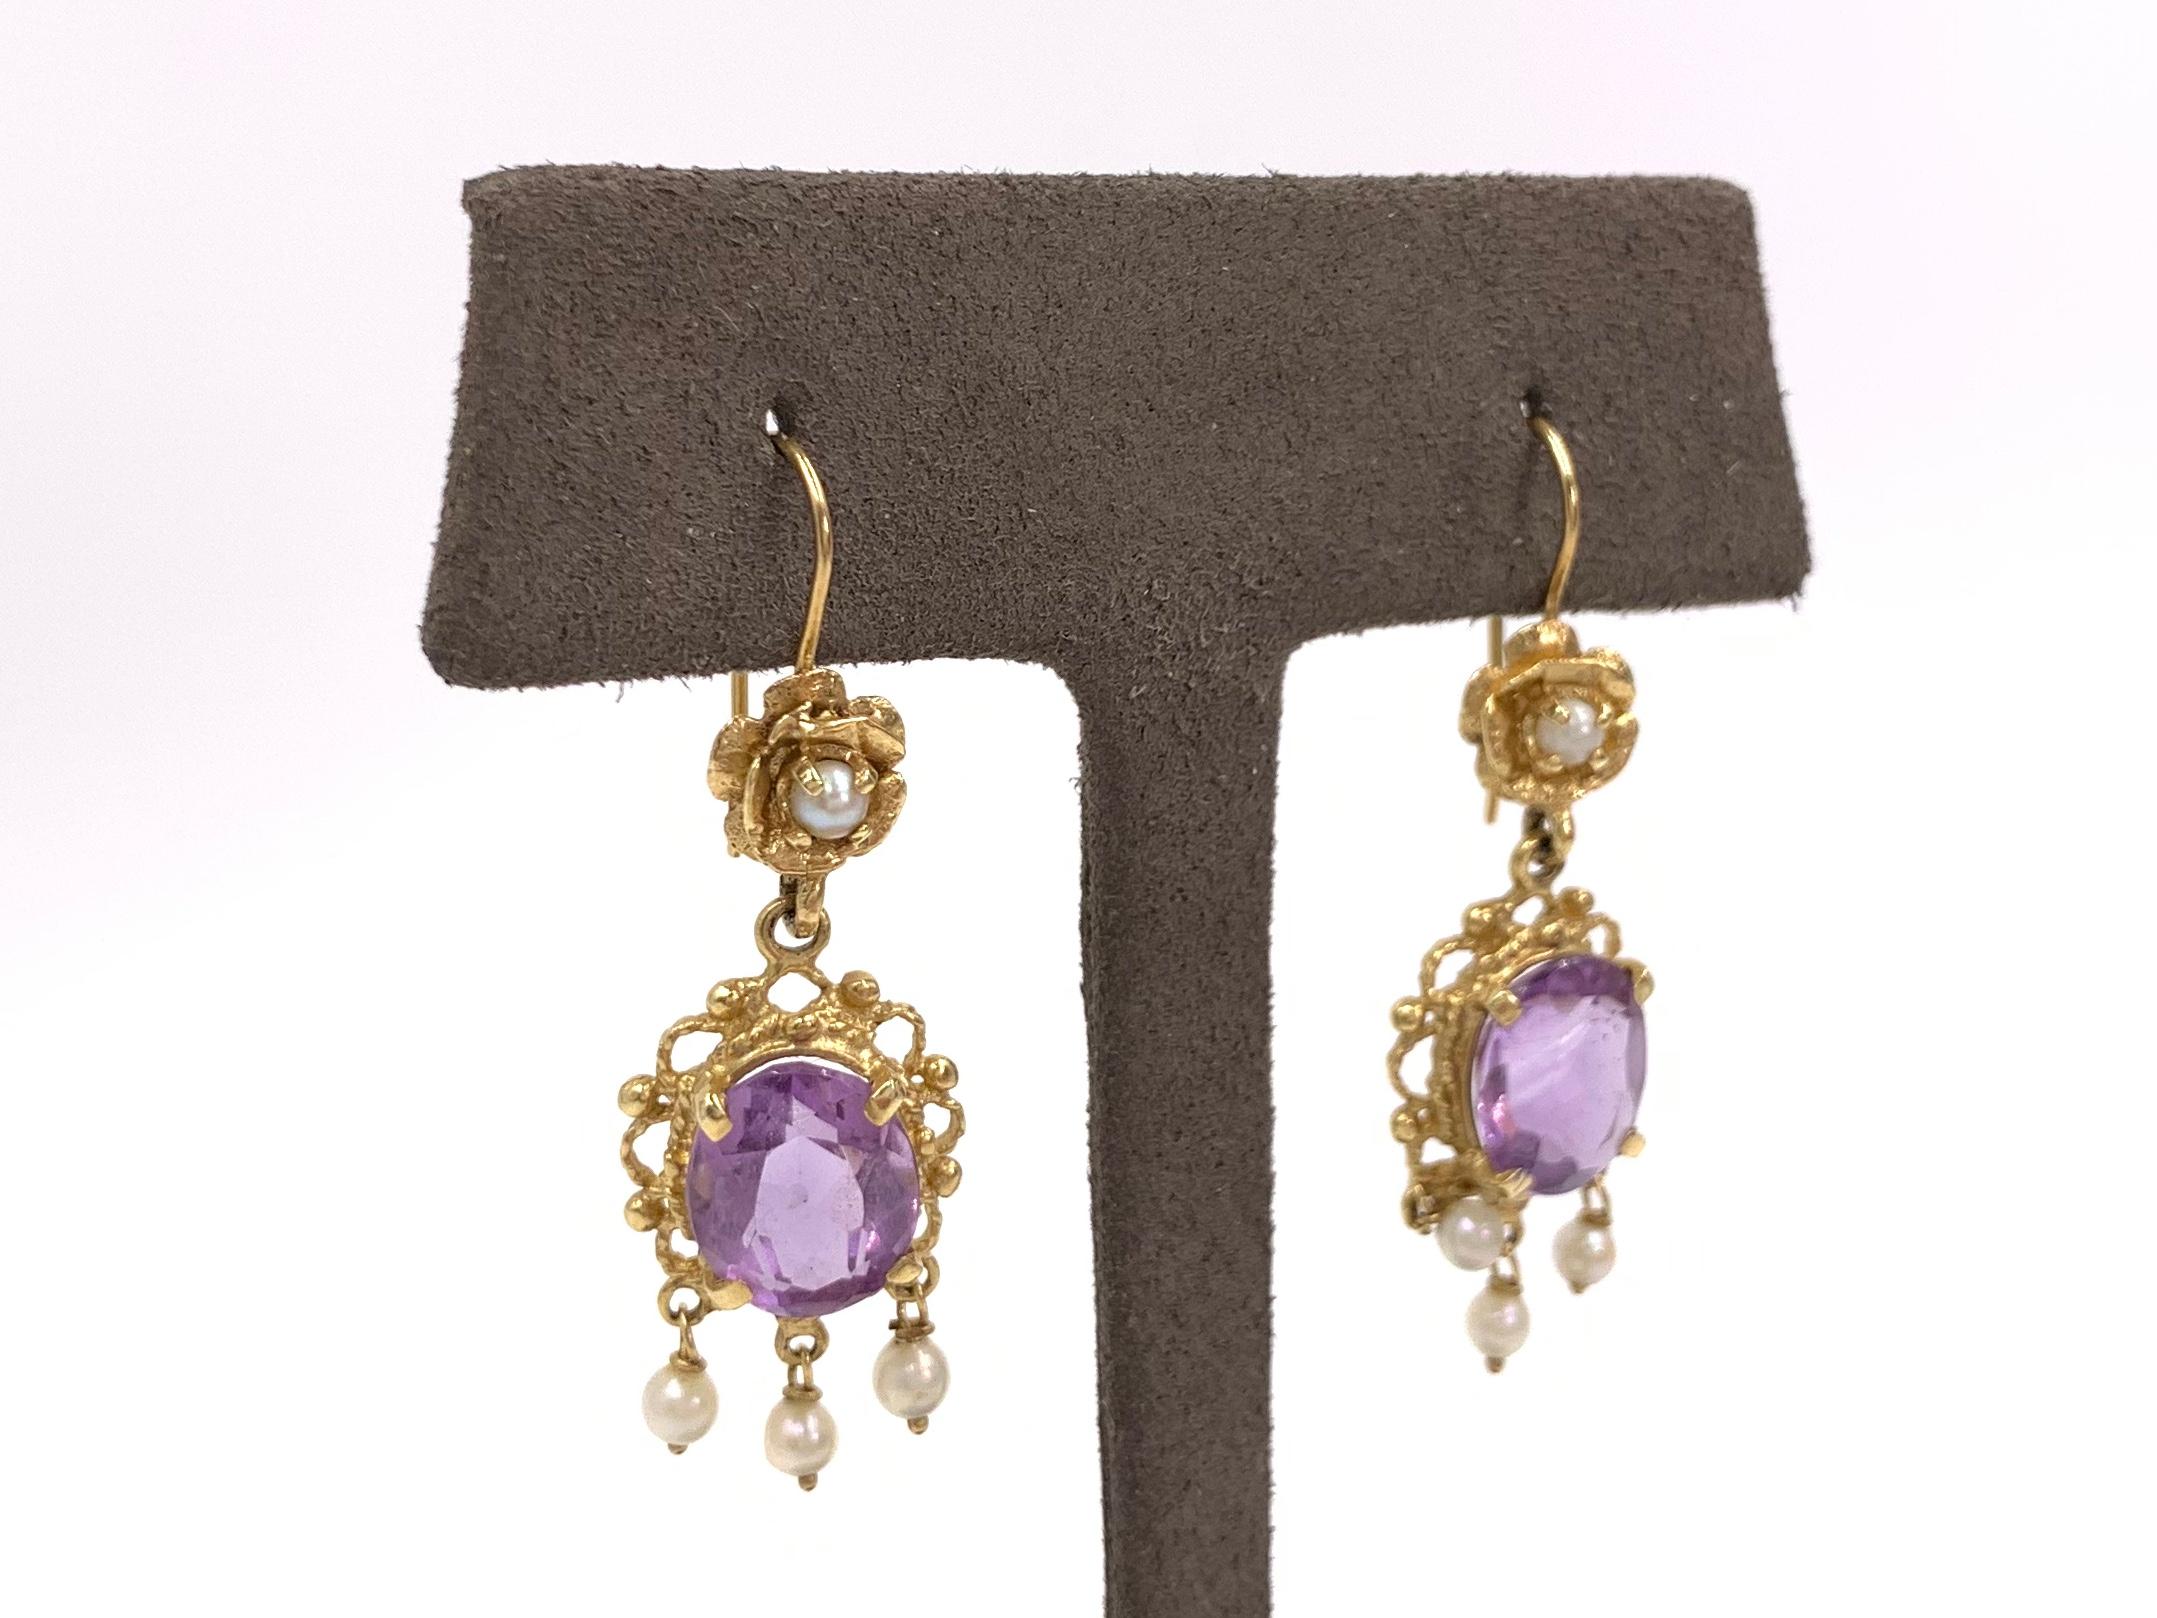 14 Karat yellow gold Victorian inspired delicate and feminine drop earrings featuring oval light purple amethyst gemstones (measuring 10mm x 8mm) and 3mm ivory seed pearls. Earrings are fixed with kidney ear wire posts.